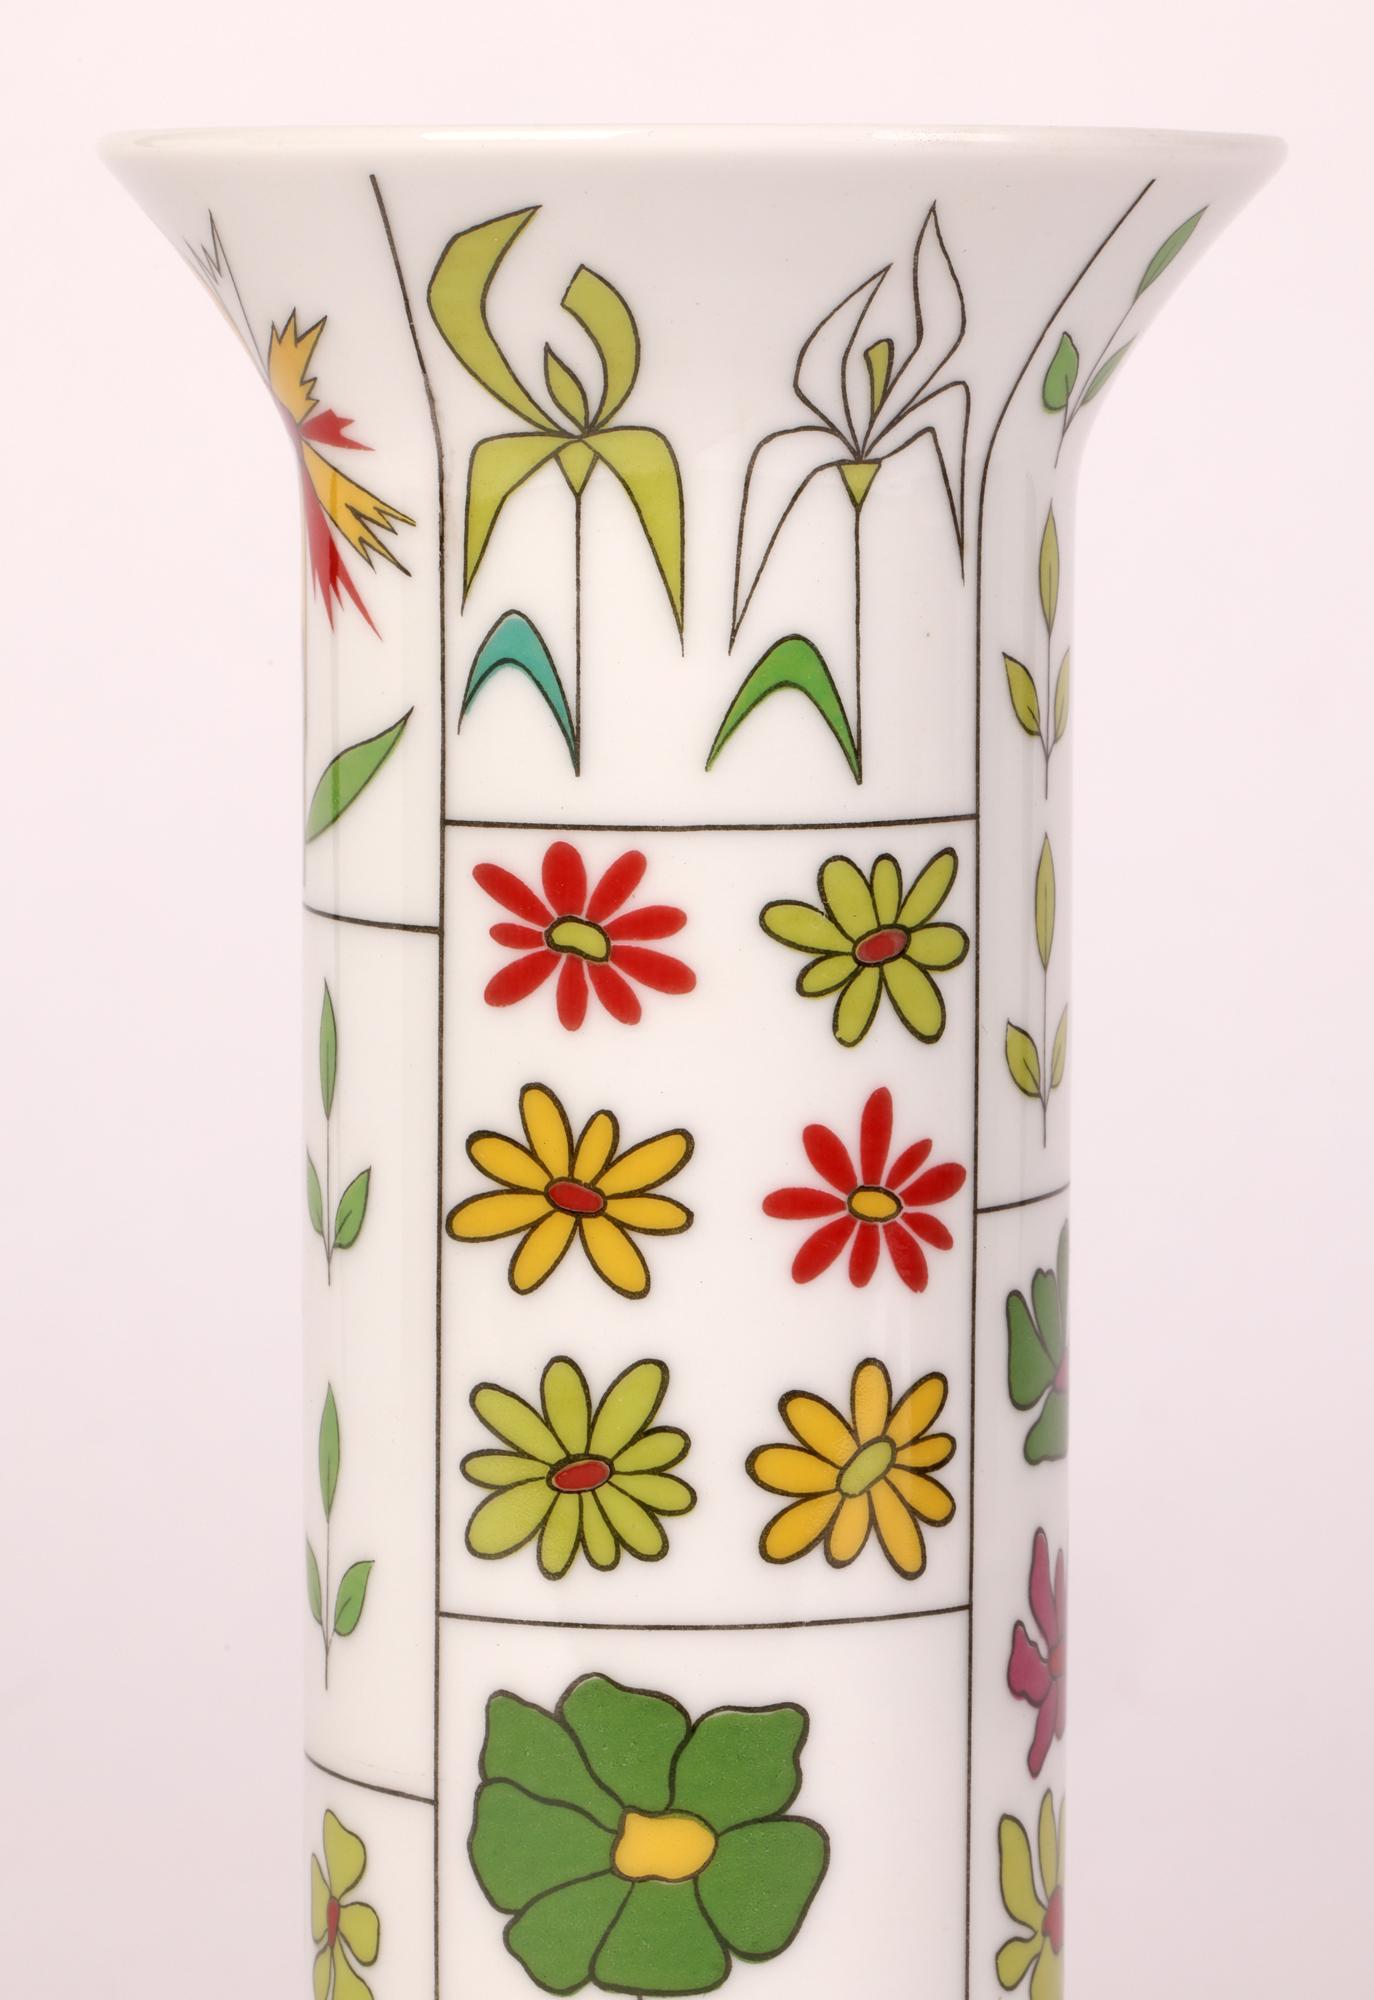 A stylish German Rosenthal Studio-Linie Berlin design porcelain vase decorated with floral designs by Hans Theo Baumann (Swiss, 1924-2016) dating from the 1970’s. The vase is of simple tall narrow cylindrical form with a trumpet shaped top and is